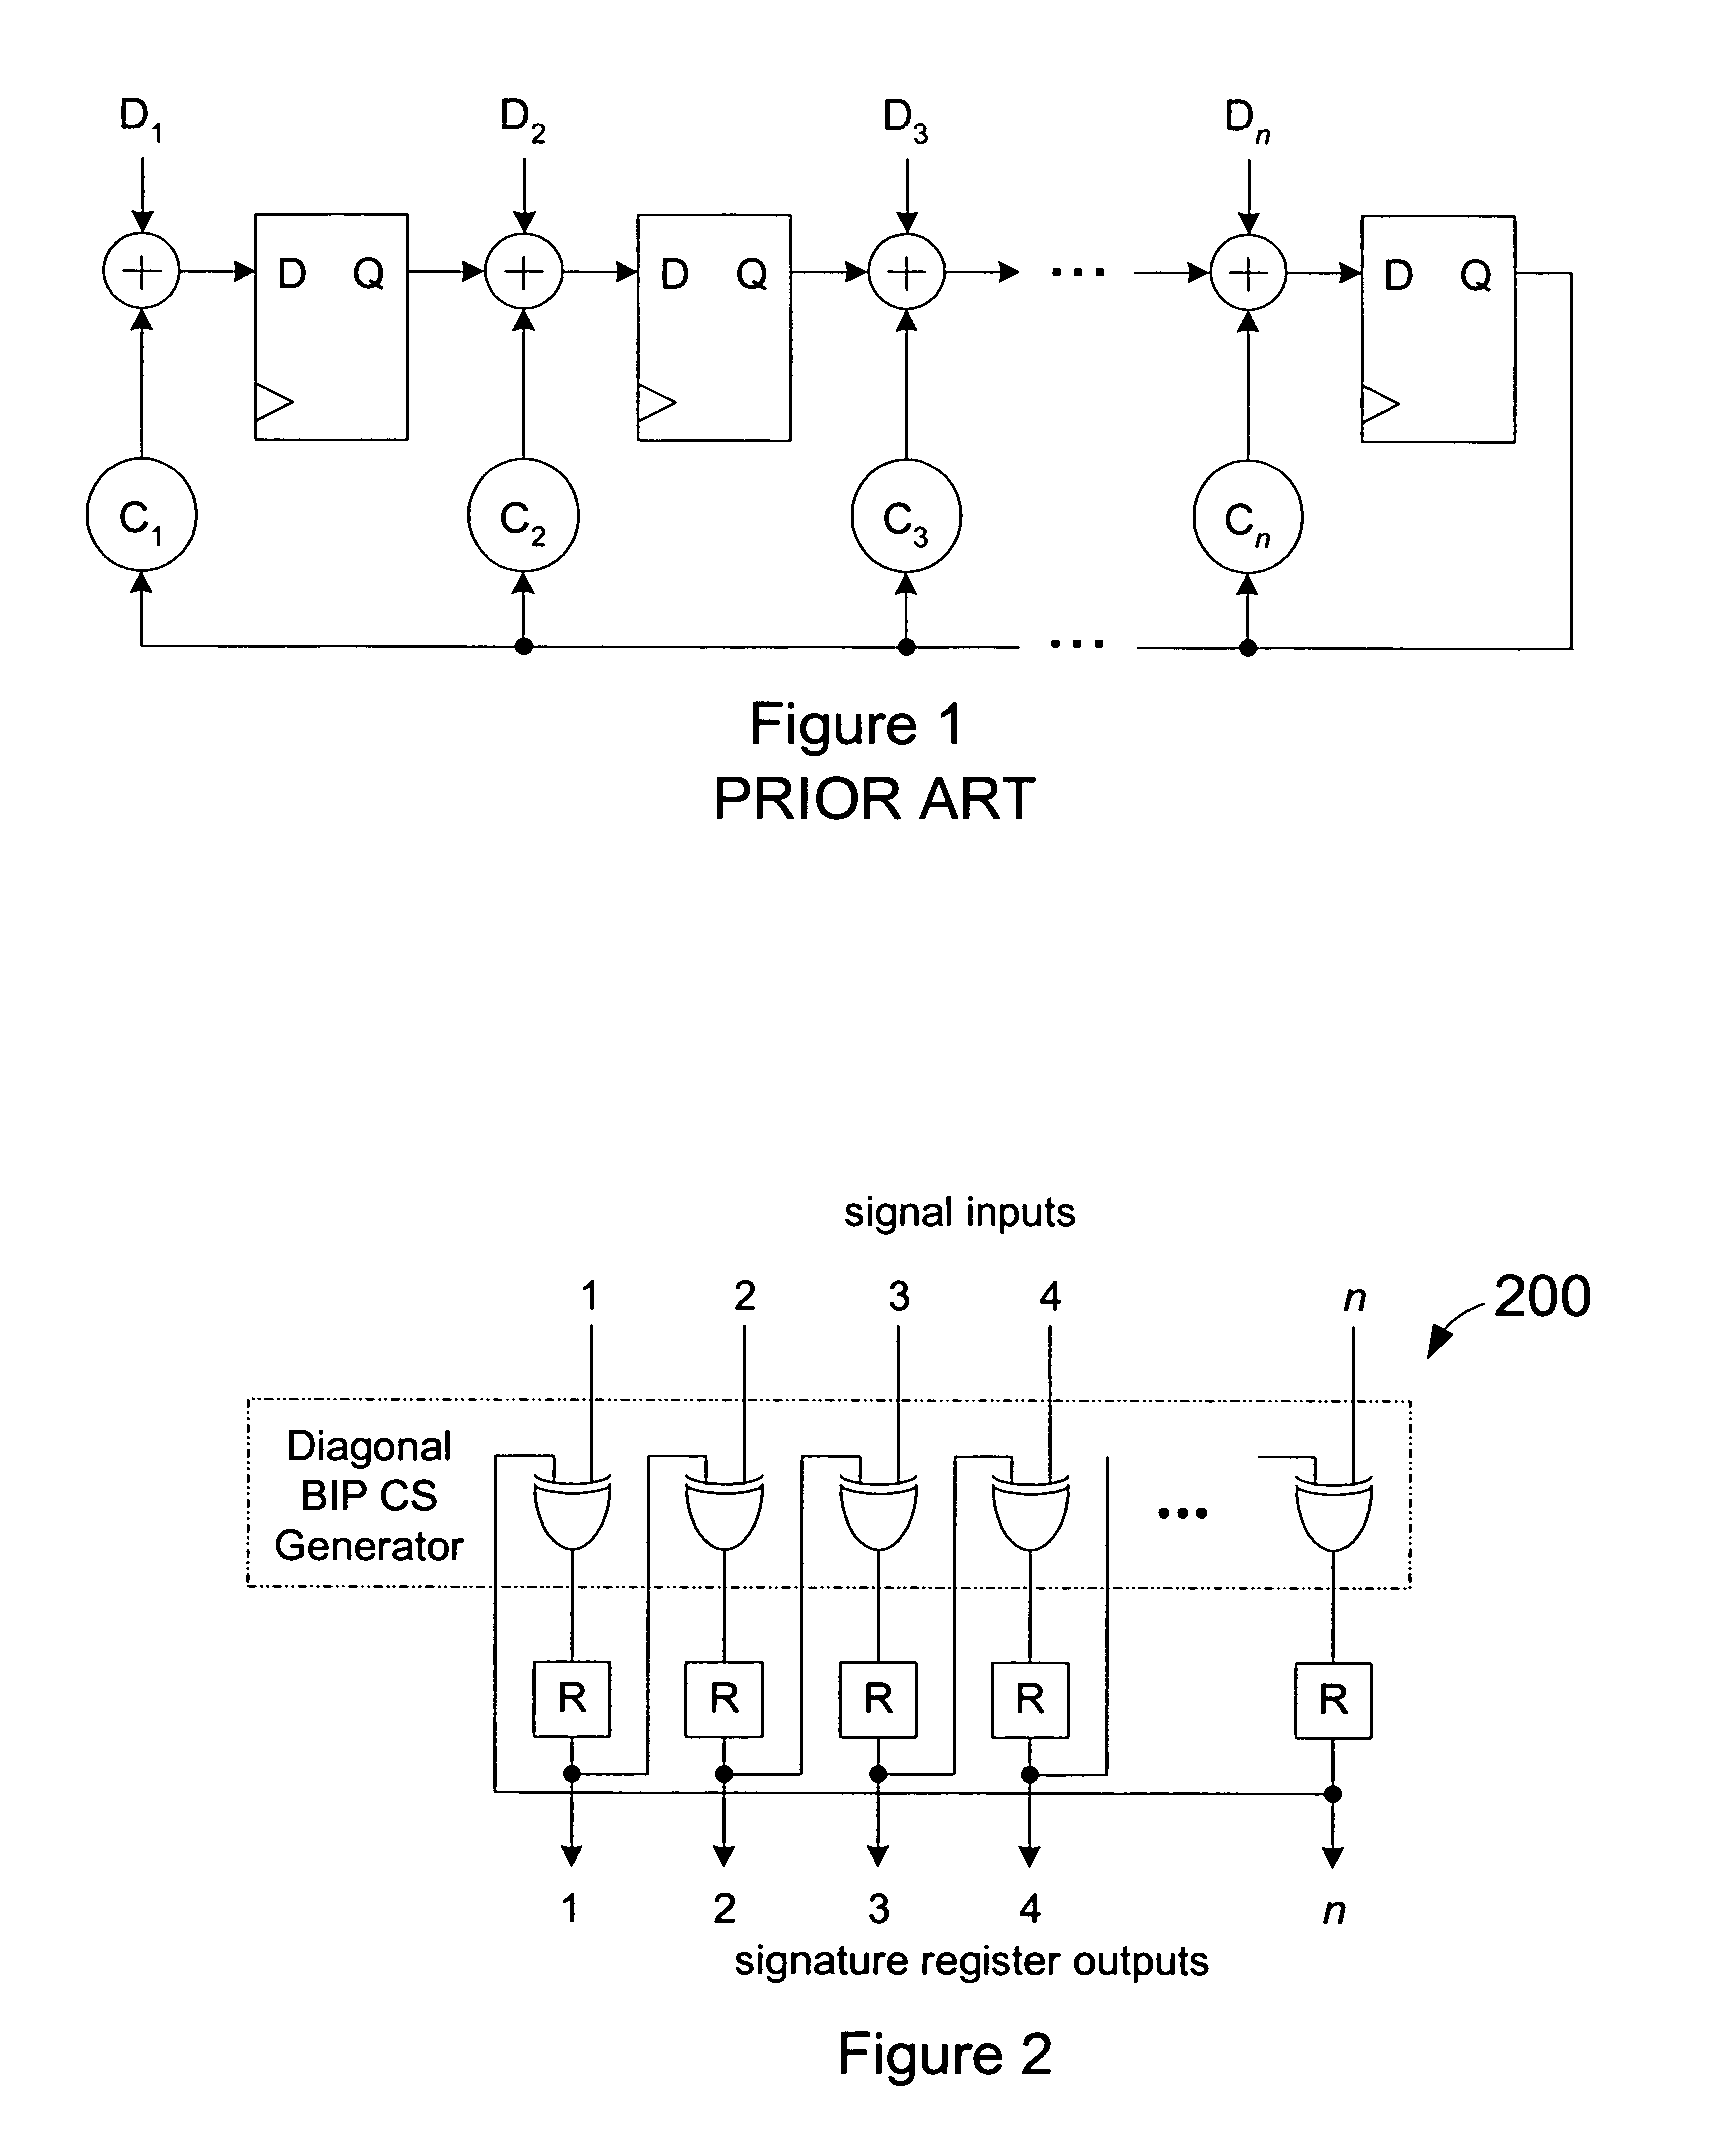 Systems and methods for signature circuits